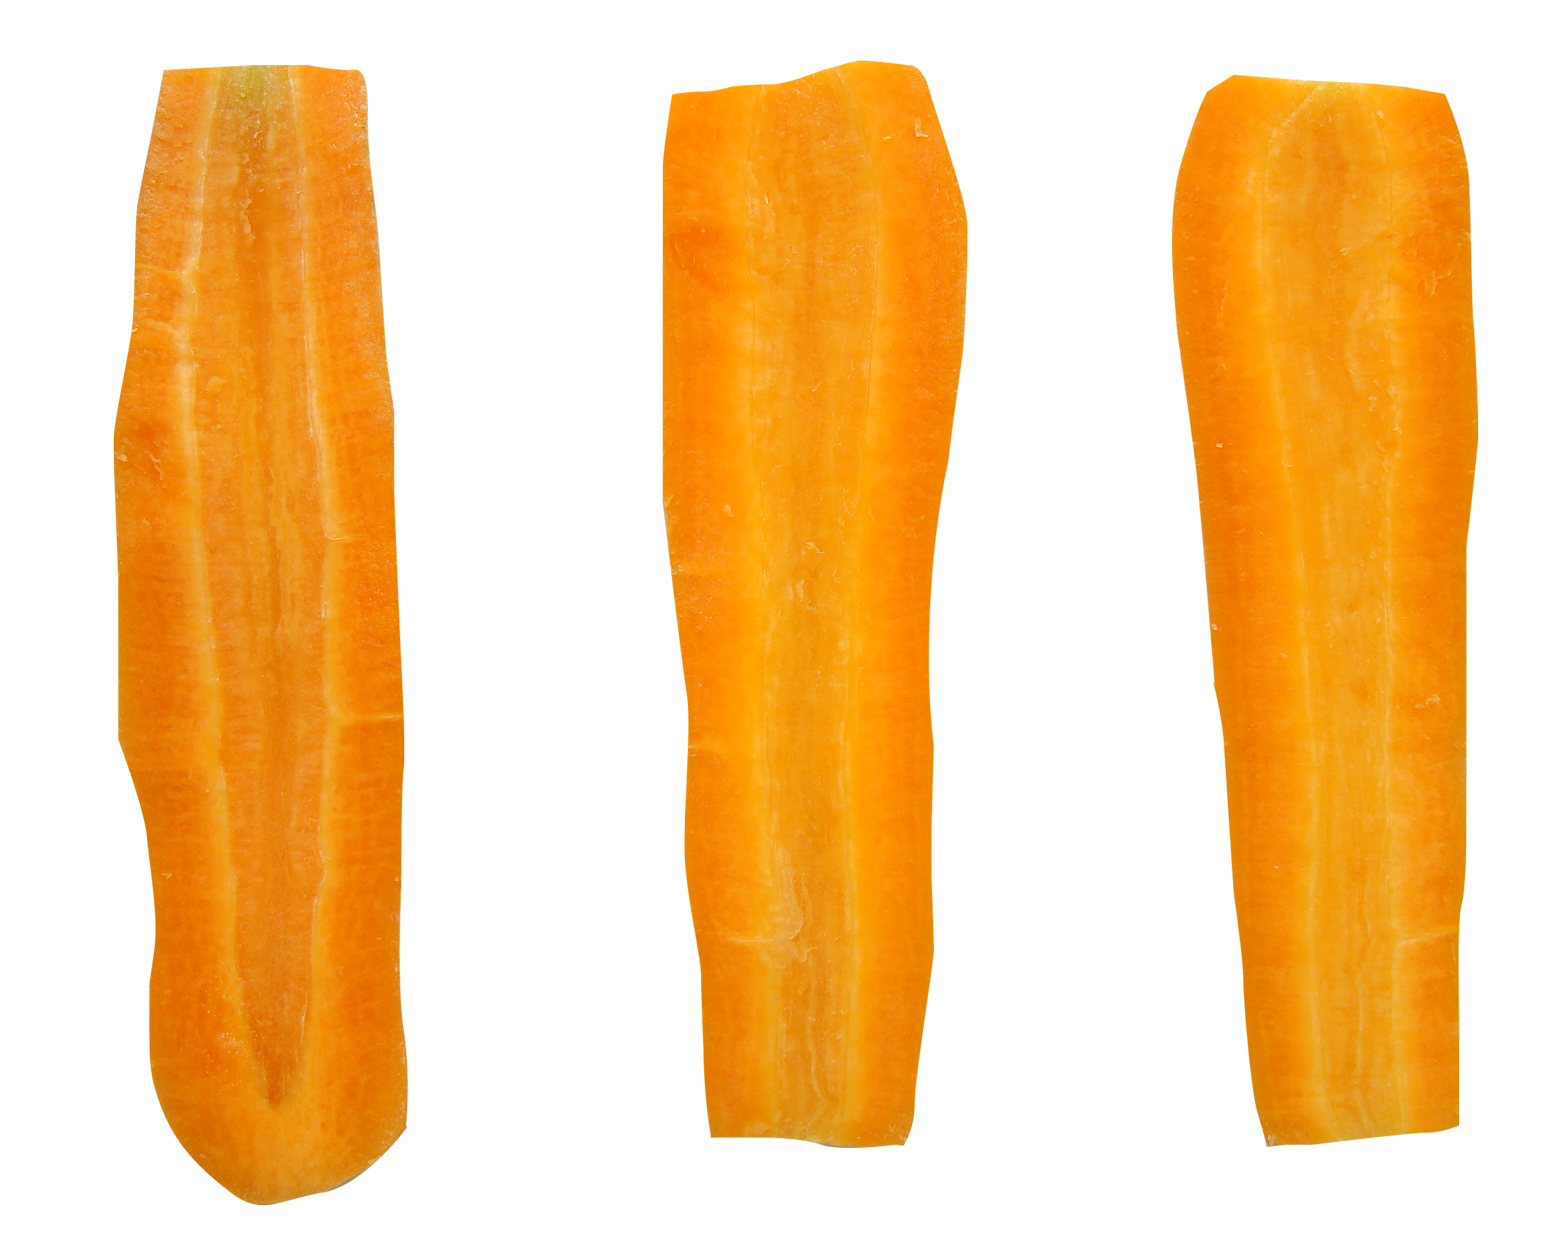 Carrot Slices Free Download PNG HQ PNG Image